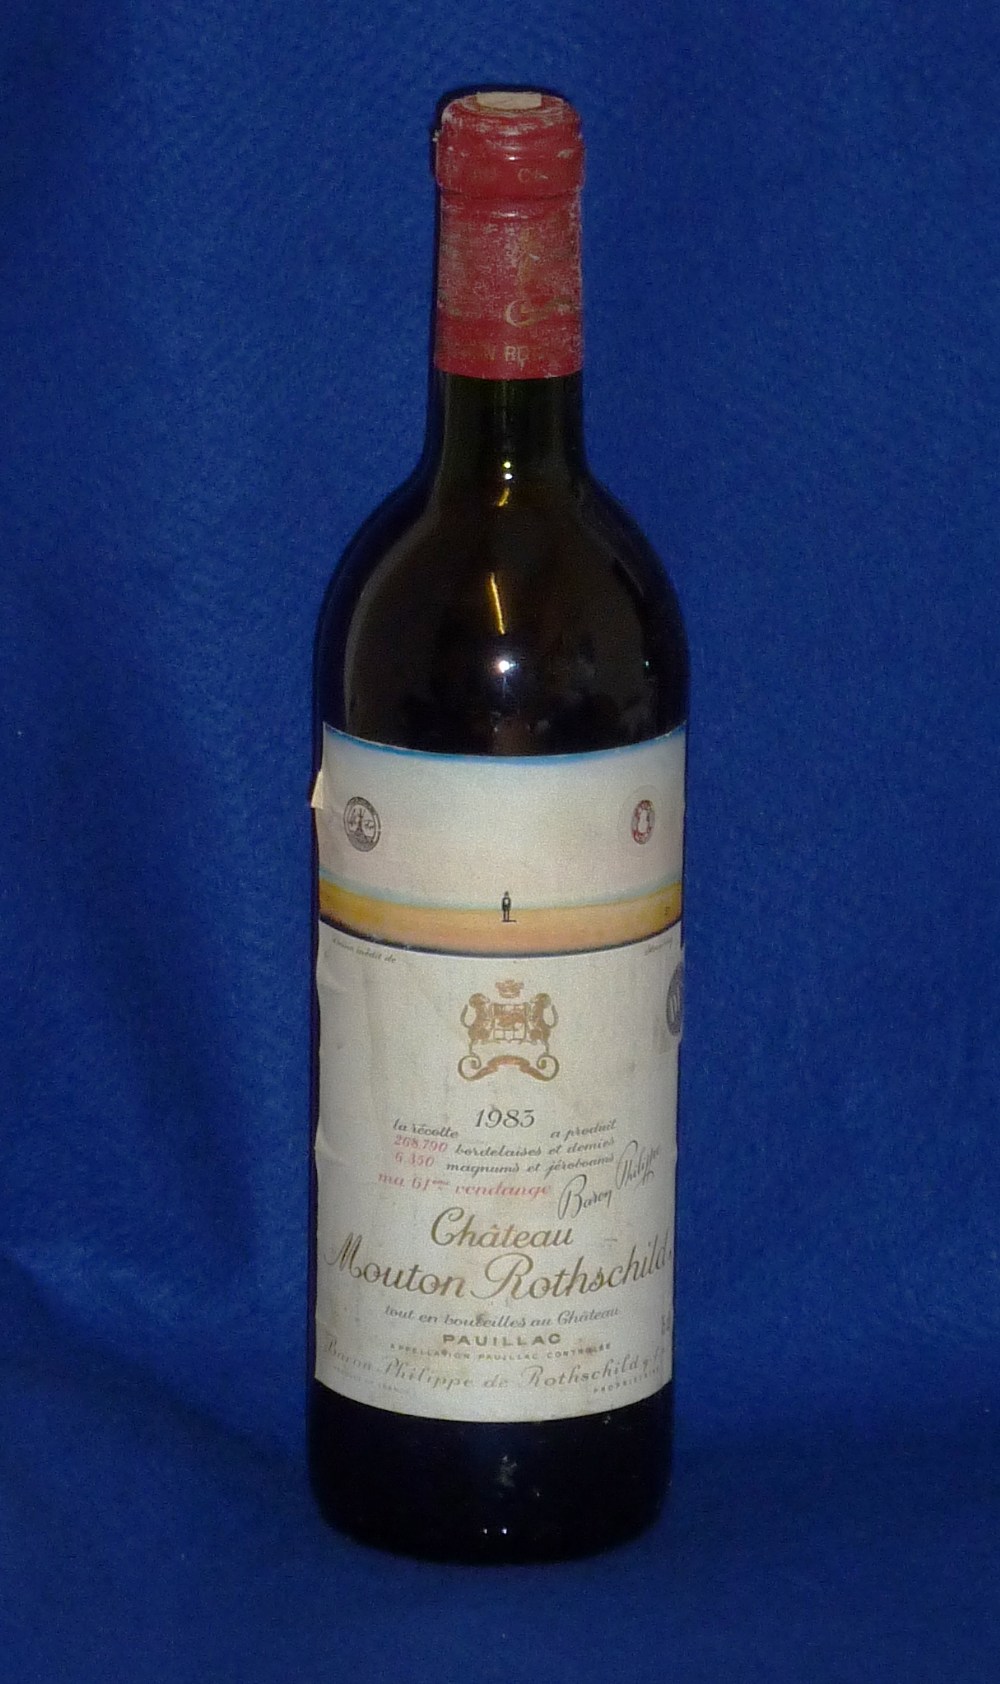 A Bottle of 1983 Chateau Mouton Rothschild